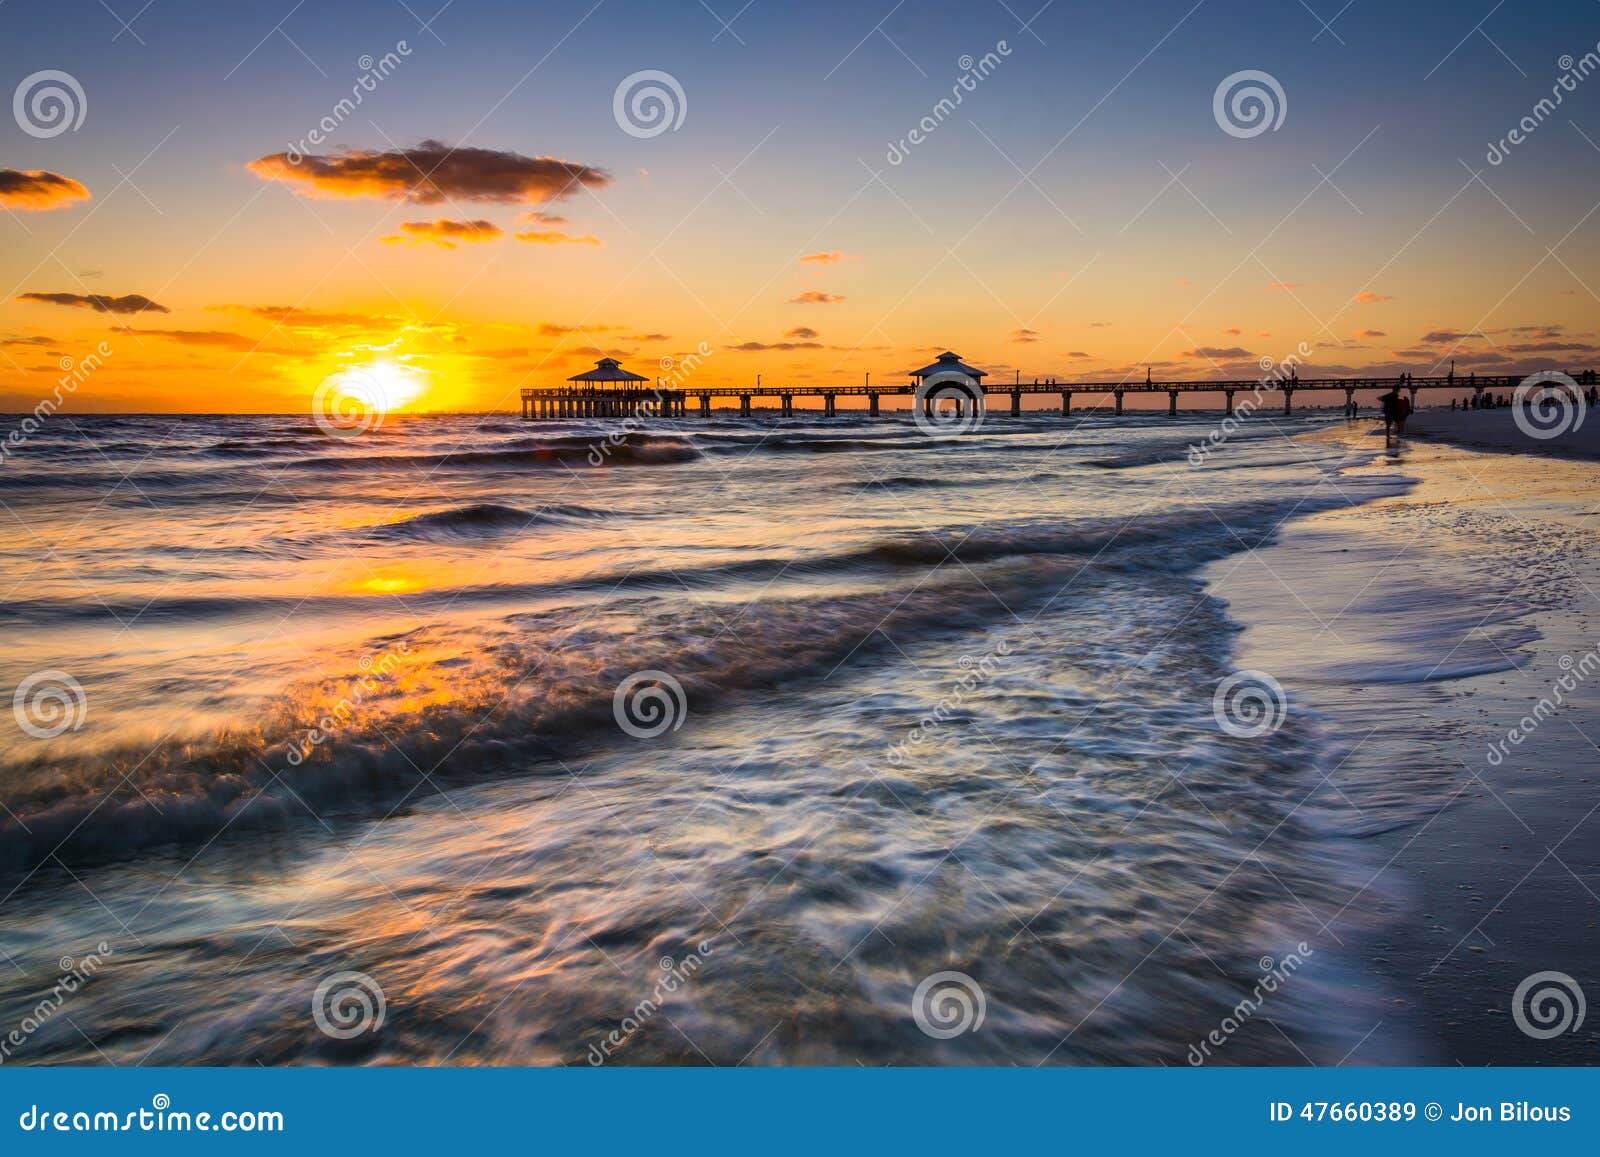 sunset over the fishing pier and gulf of mexico in fort myers be